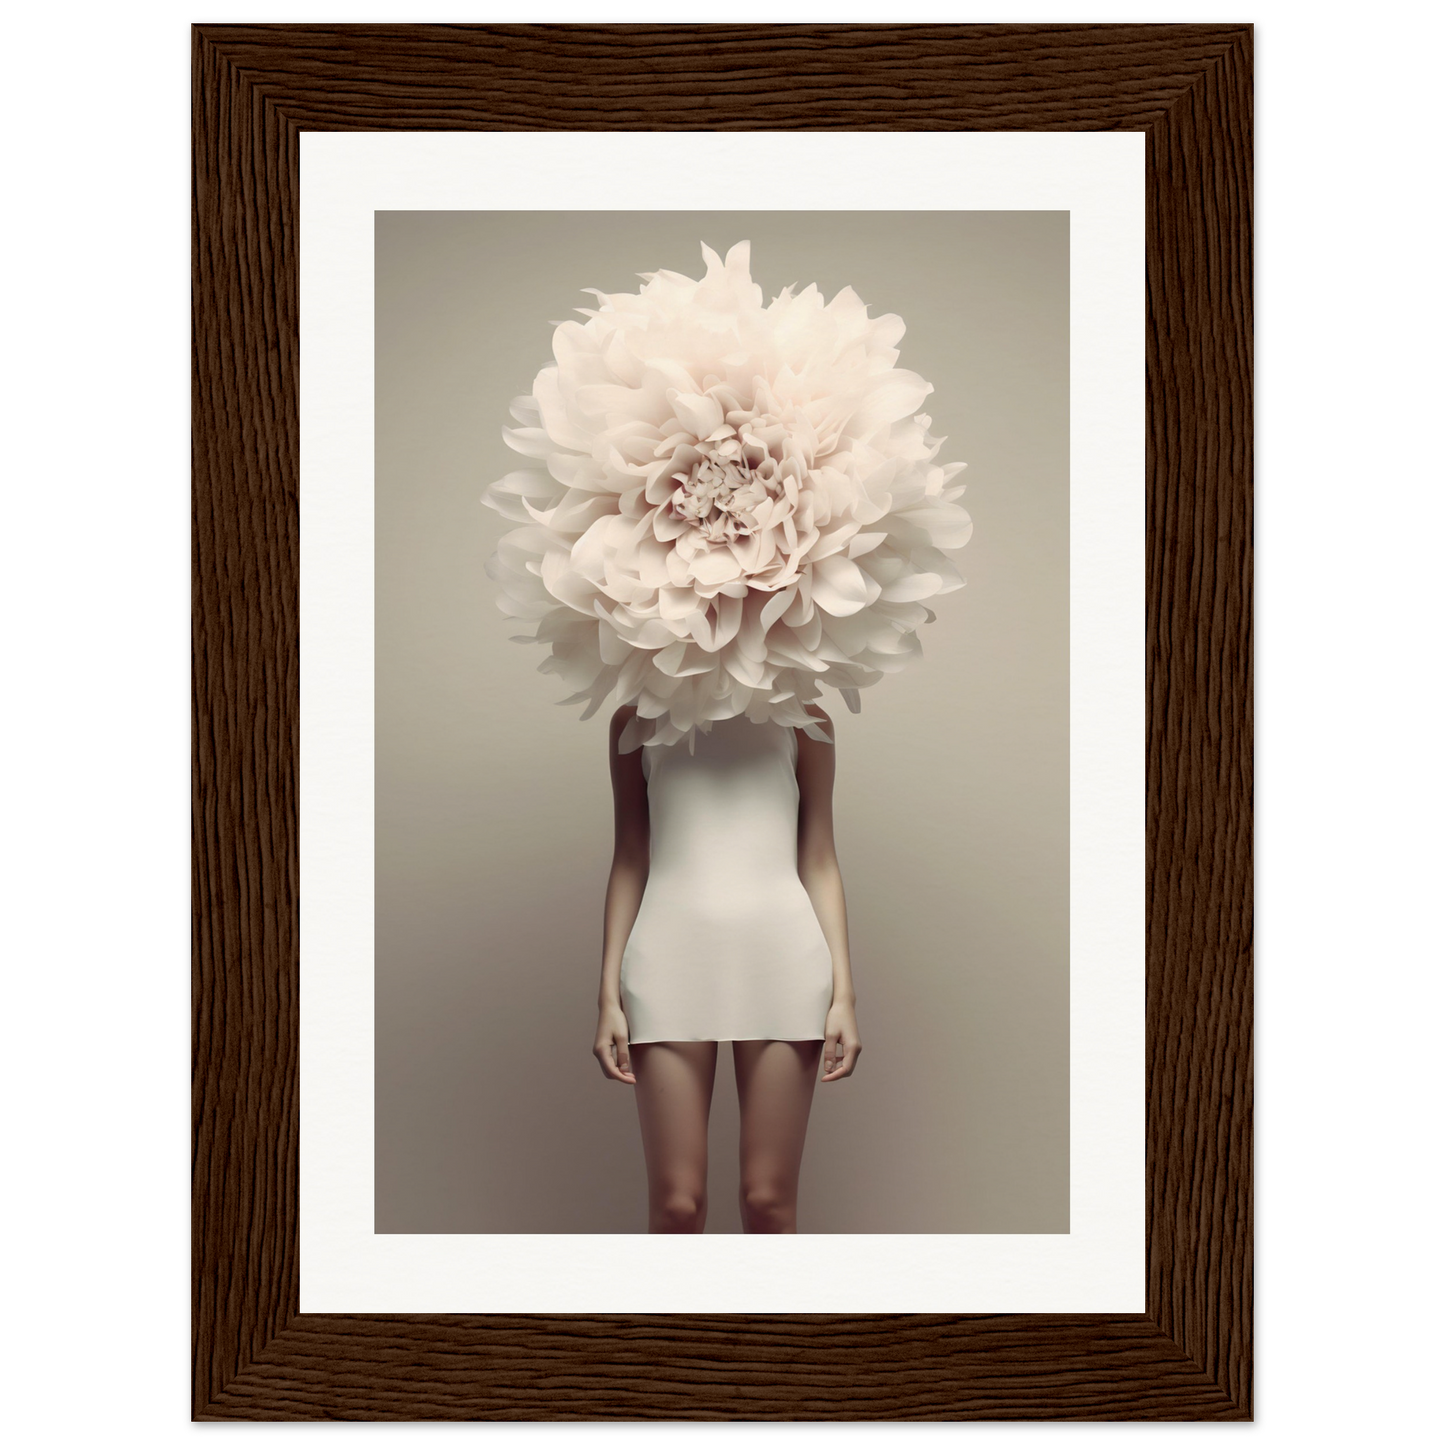 A woman in a White Flower Head The Oracle Windows™ Collection dress with a large flower on her head, perfect for a poster for my wall.